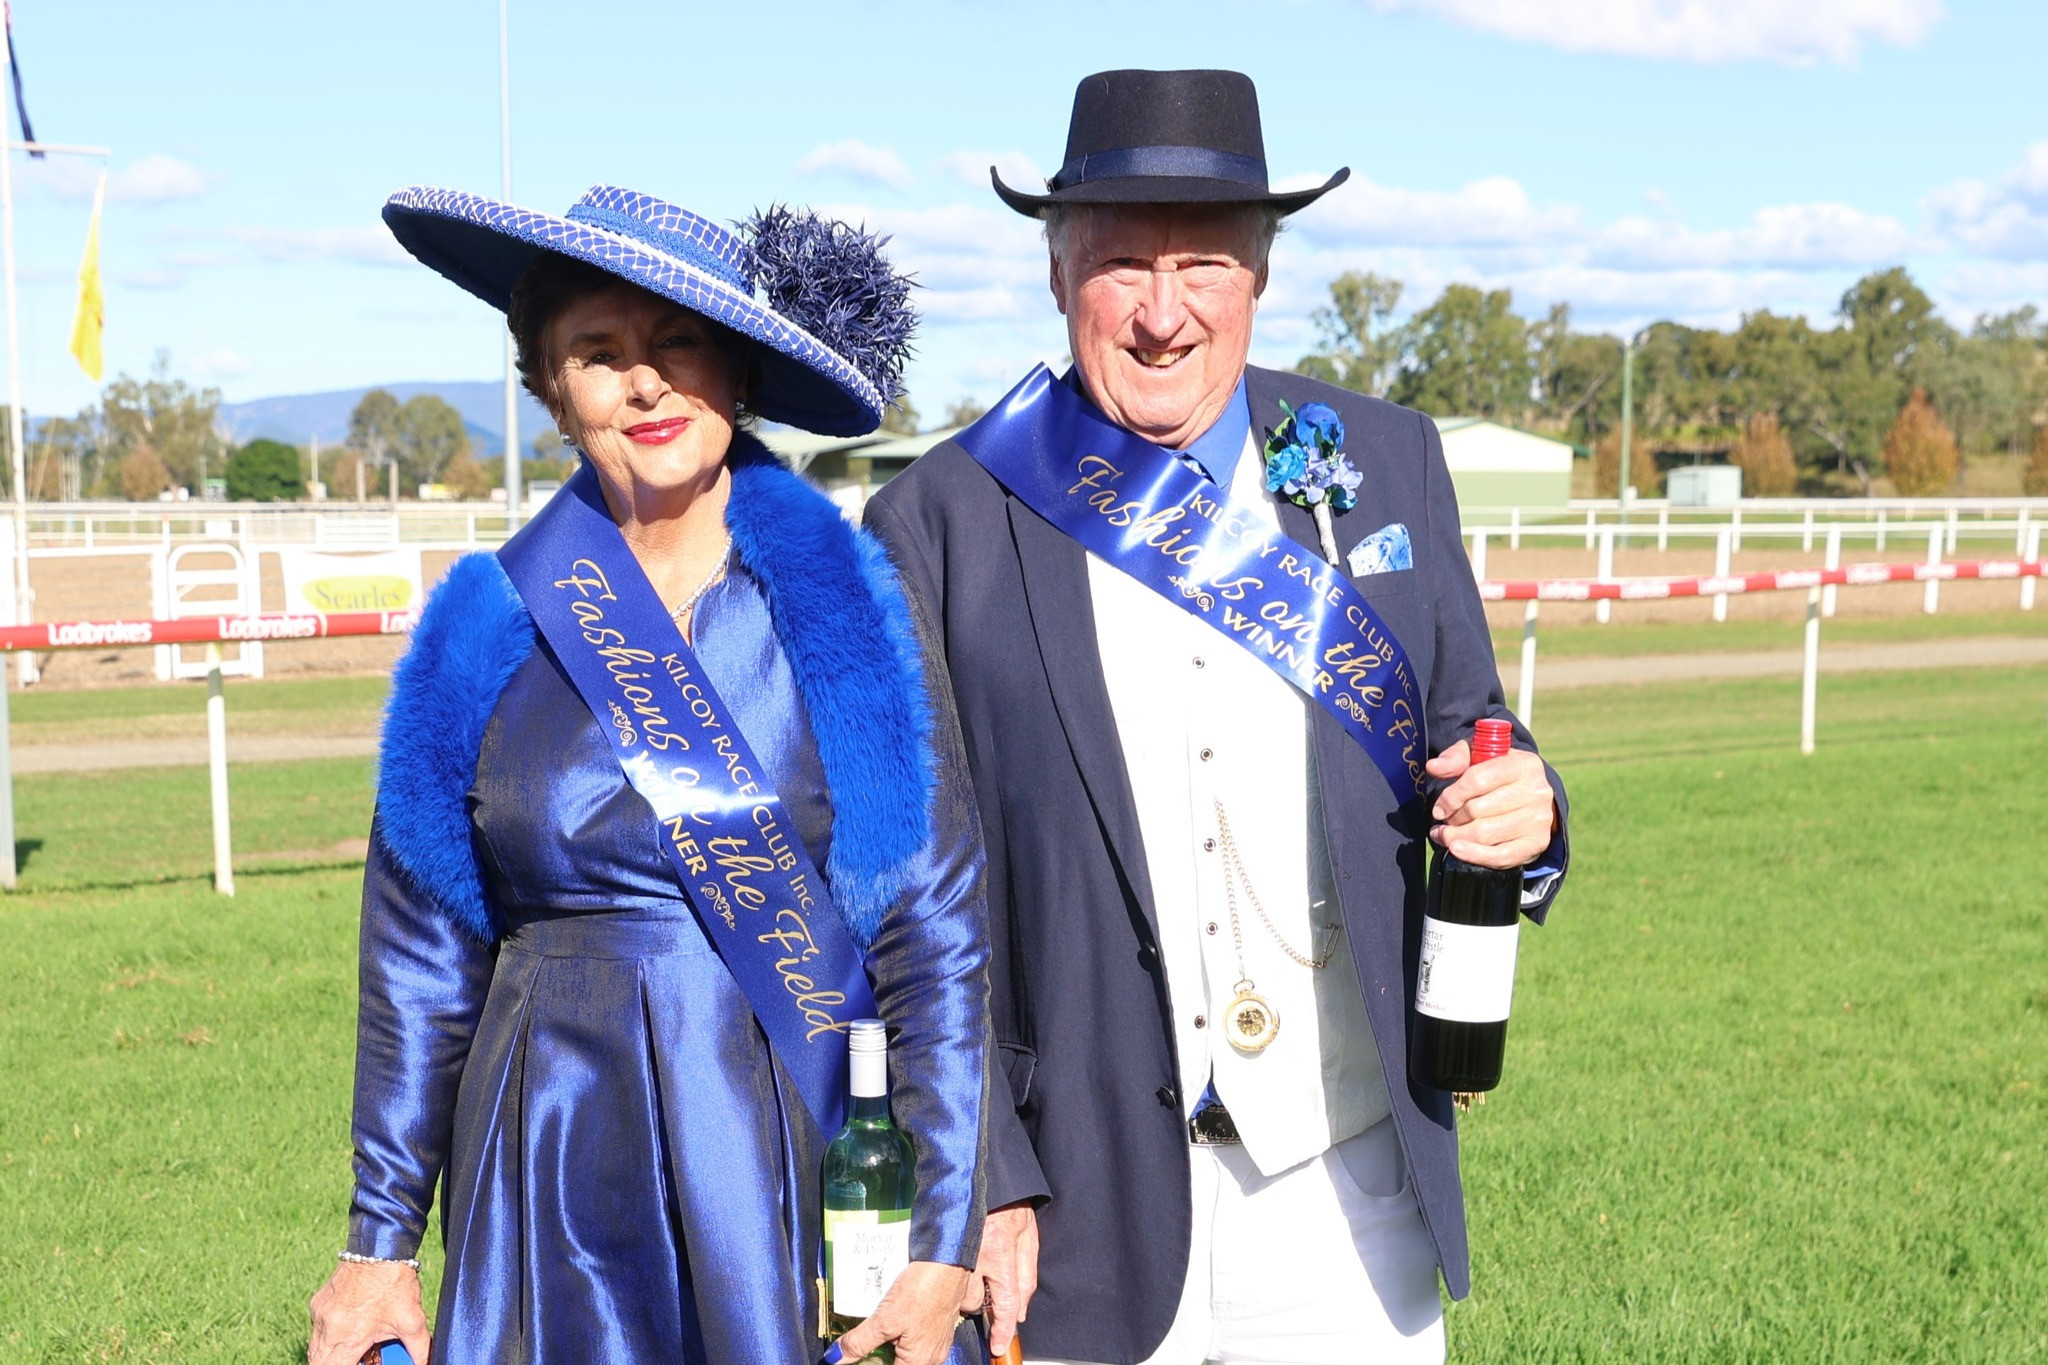 Best couple winner: Barbara and Thomas Thompson at the Kilcoy Cup race meet.